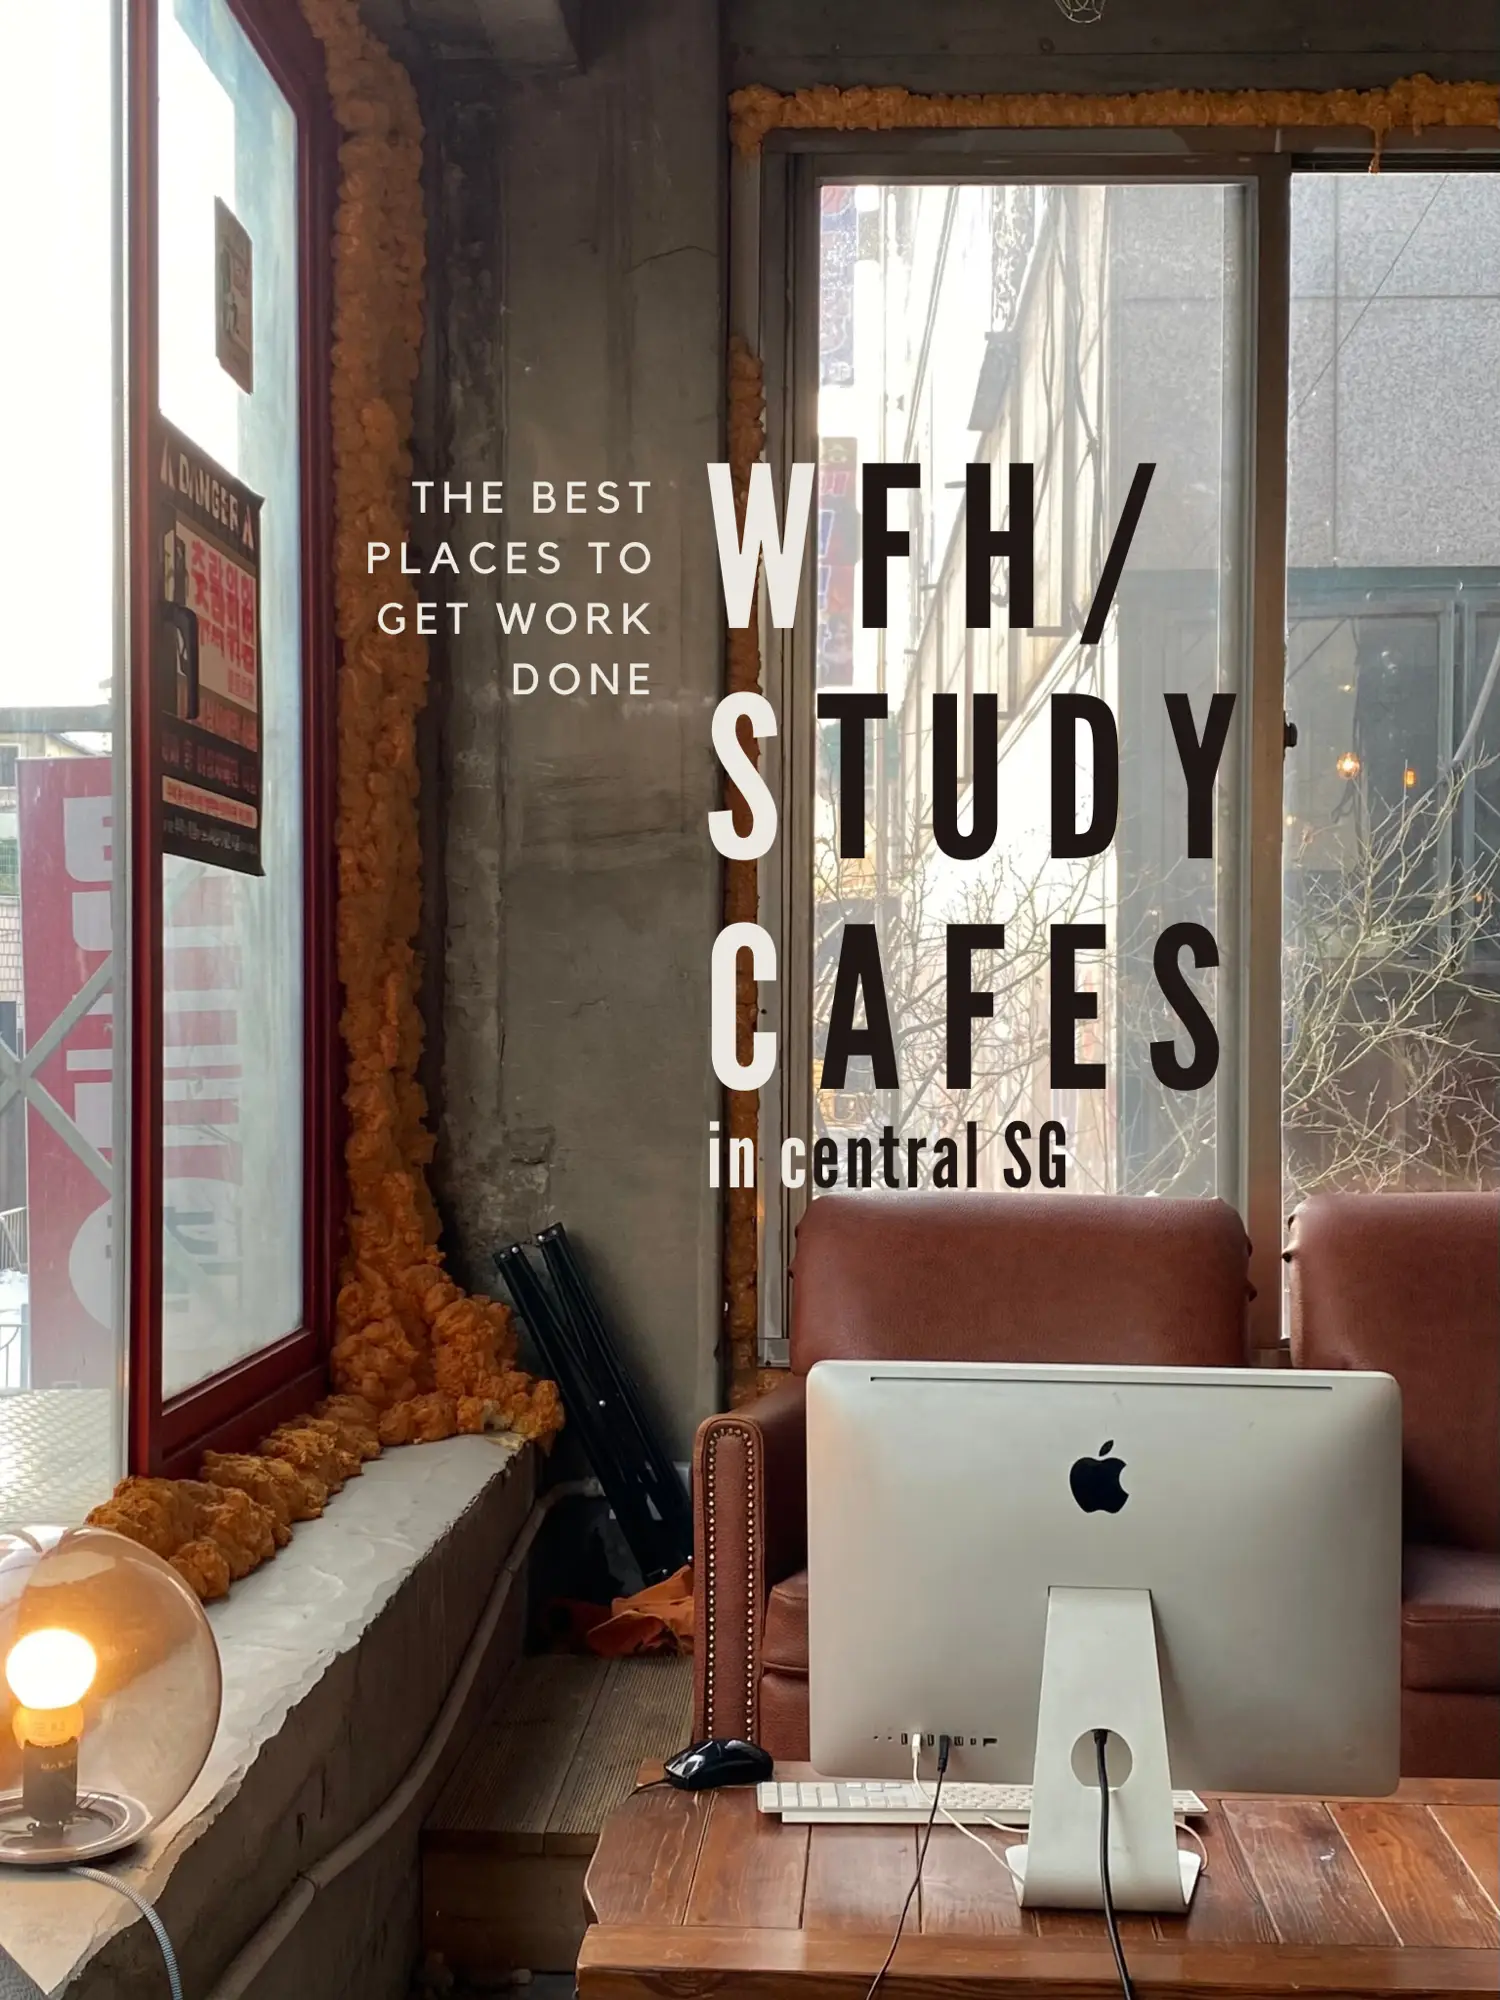 ULTIMATE list of work-friendly cafes in CENTRAL sg's images(0)